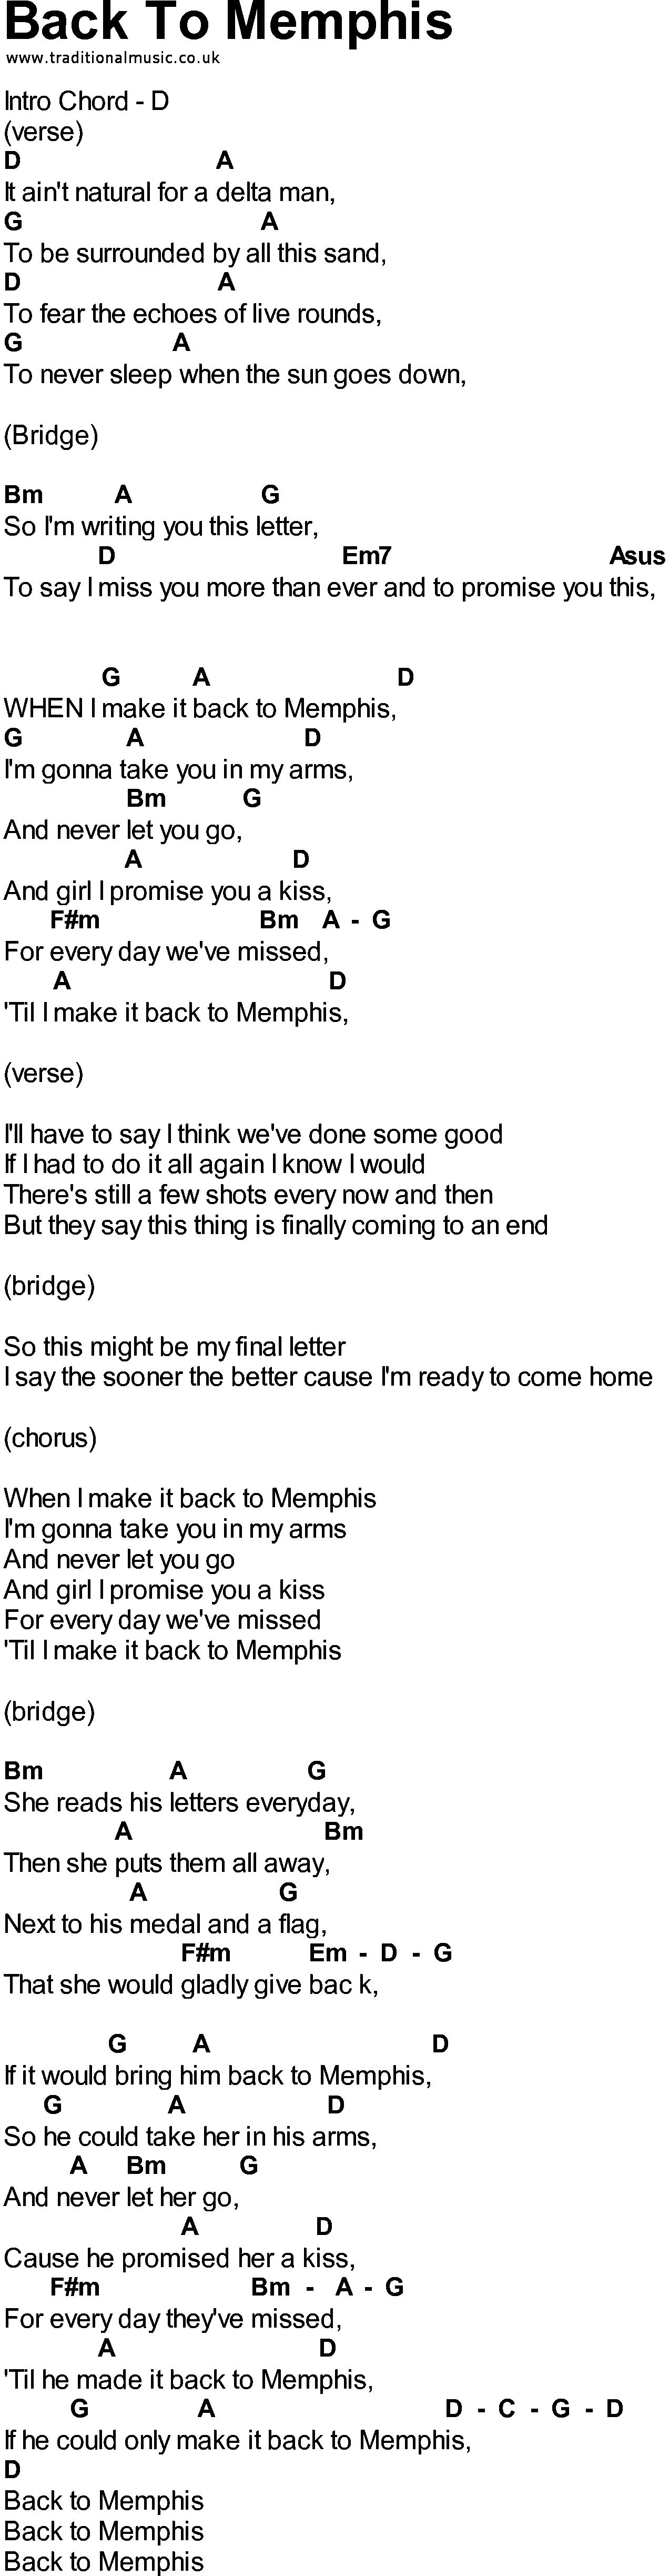 Bluegrass songs with chords - Back To Memphis